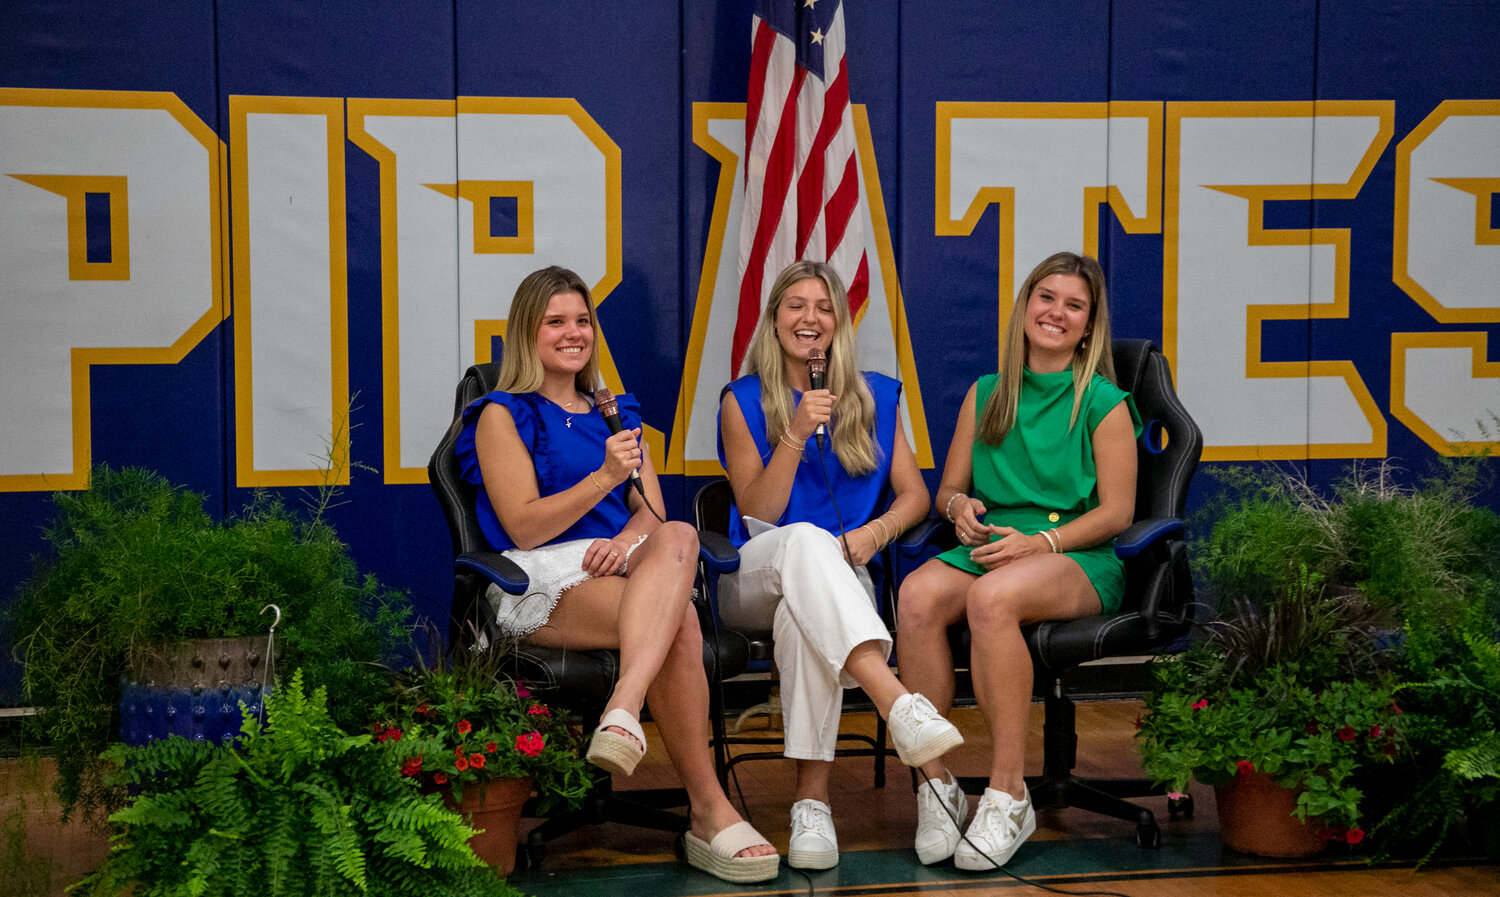 Twins Addison and Emily Smith take their turn in the hot seat on Pirate Nation Live after Monday’s signing ceremony at Fairhope High School. The pair of Pirate soccer players will join the West Florida Argonauts team after graduation.